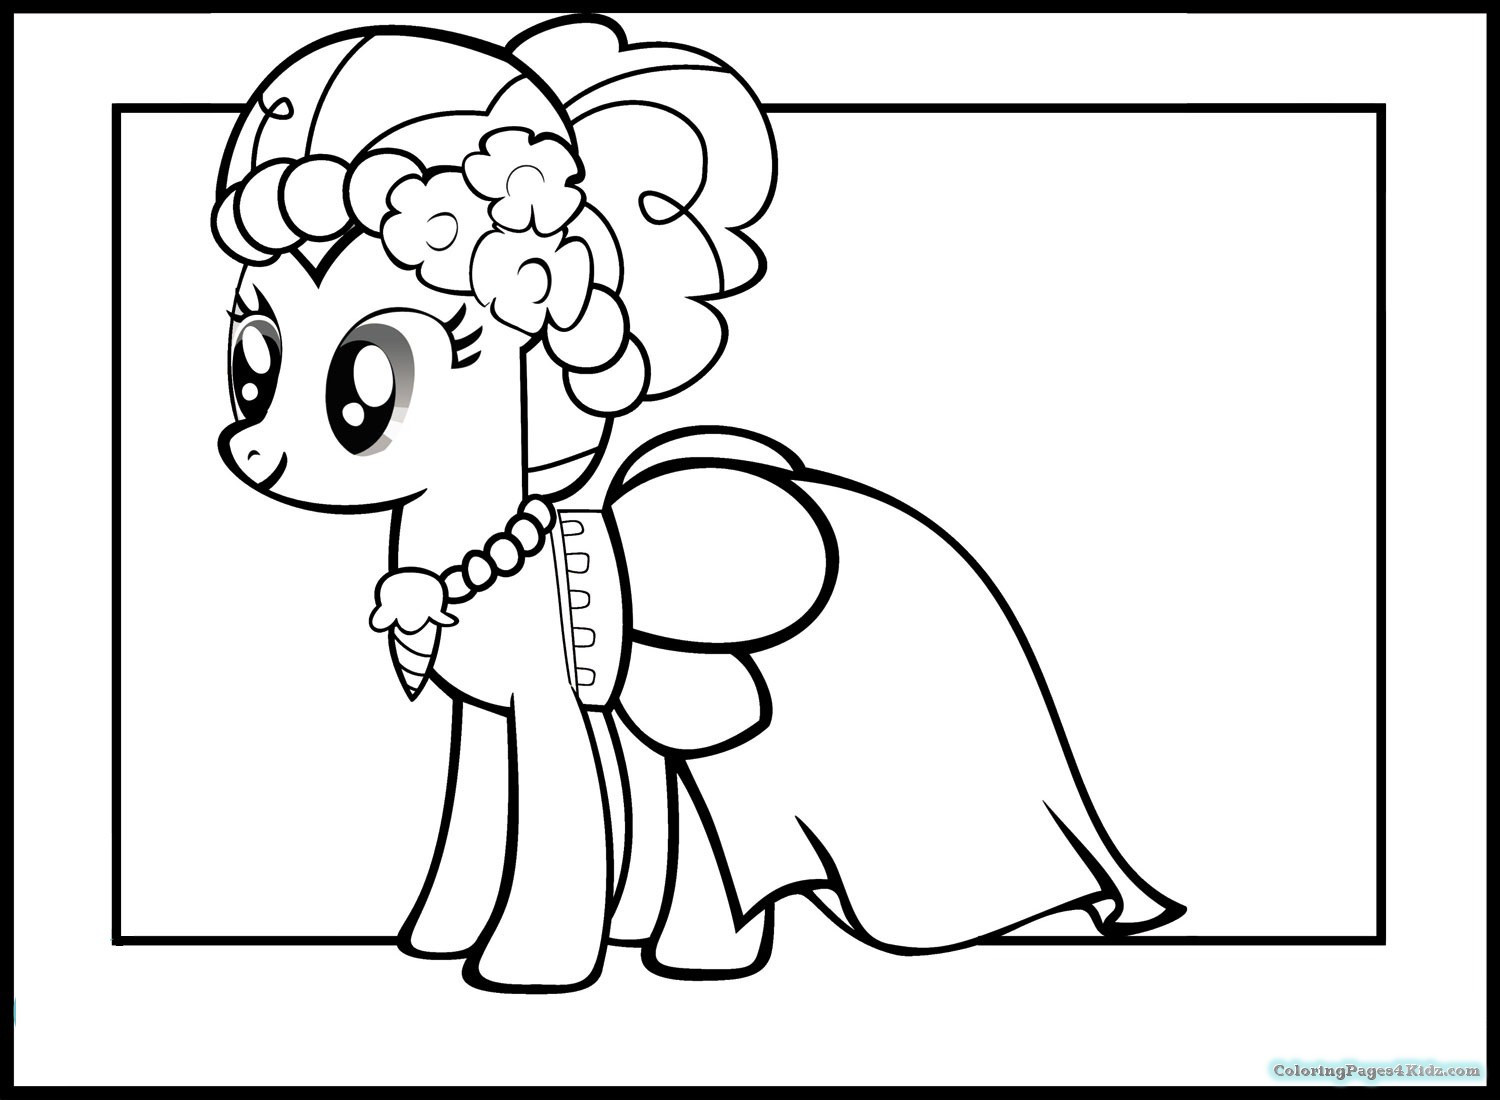 Equestria Girls Pinkie Pie Coloring Pages
 My Little Pony Equestria Girls Pinkie Pie Coloring Pages